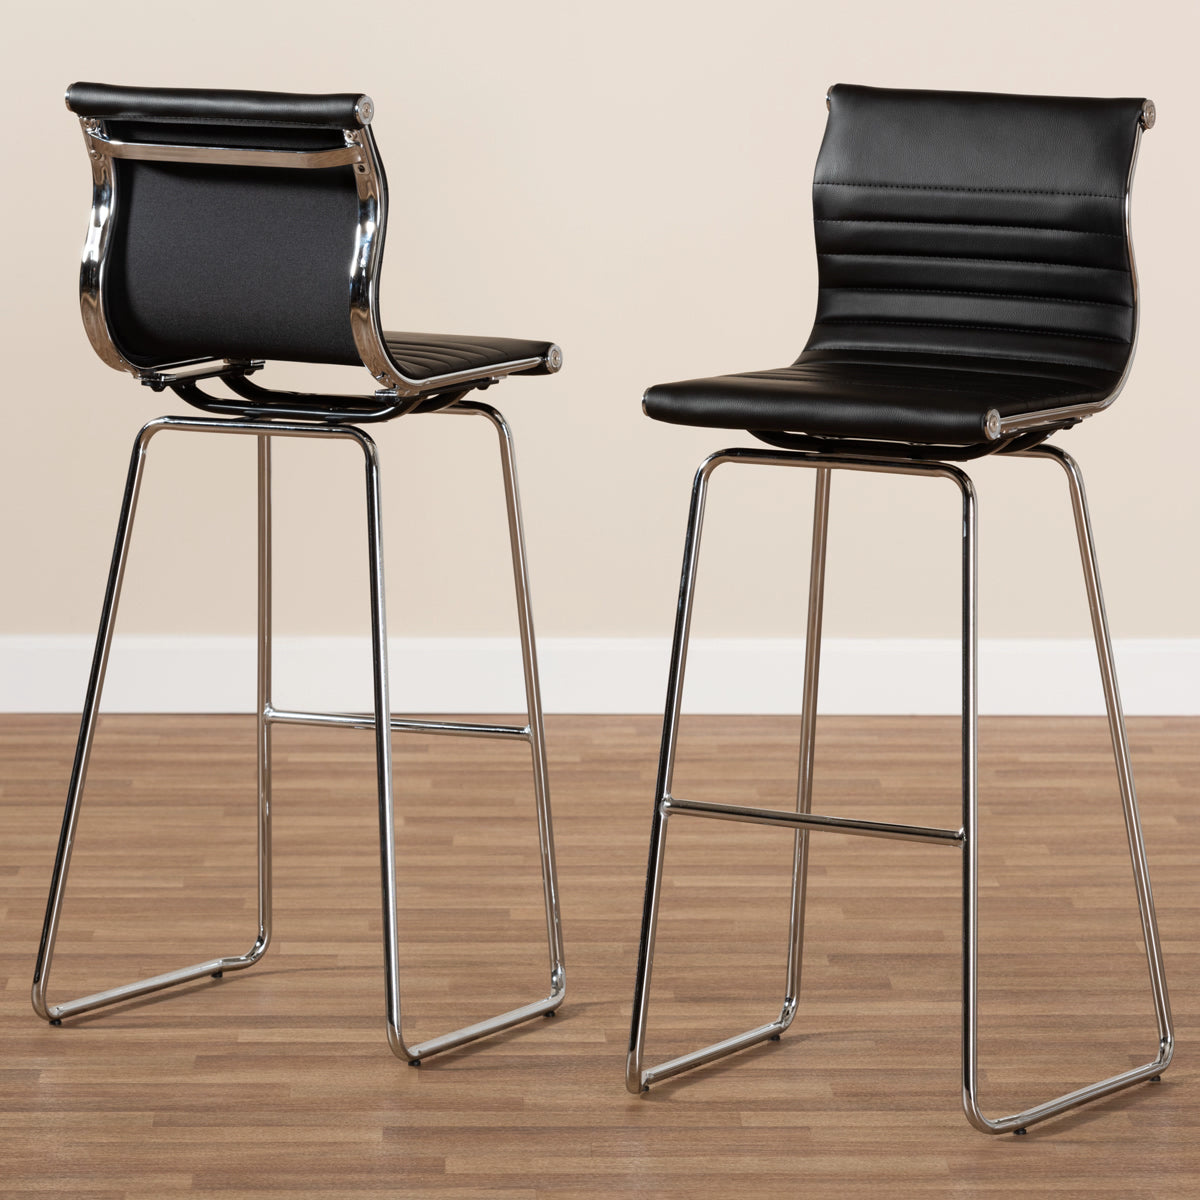 Baxton Studio Giorgio Modern and Contemporary Black Faux Leather Upholstered Chrome-Finished Steel Bar Stool Set Baxton Studio-Bar Stools-Minimal And Modern - 6